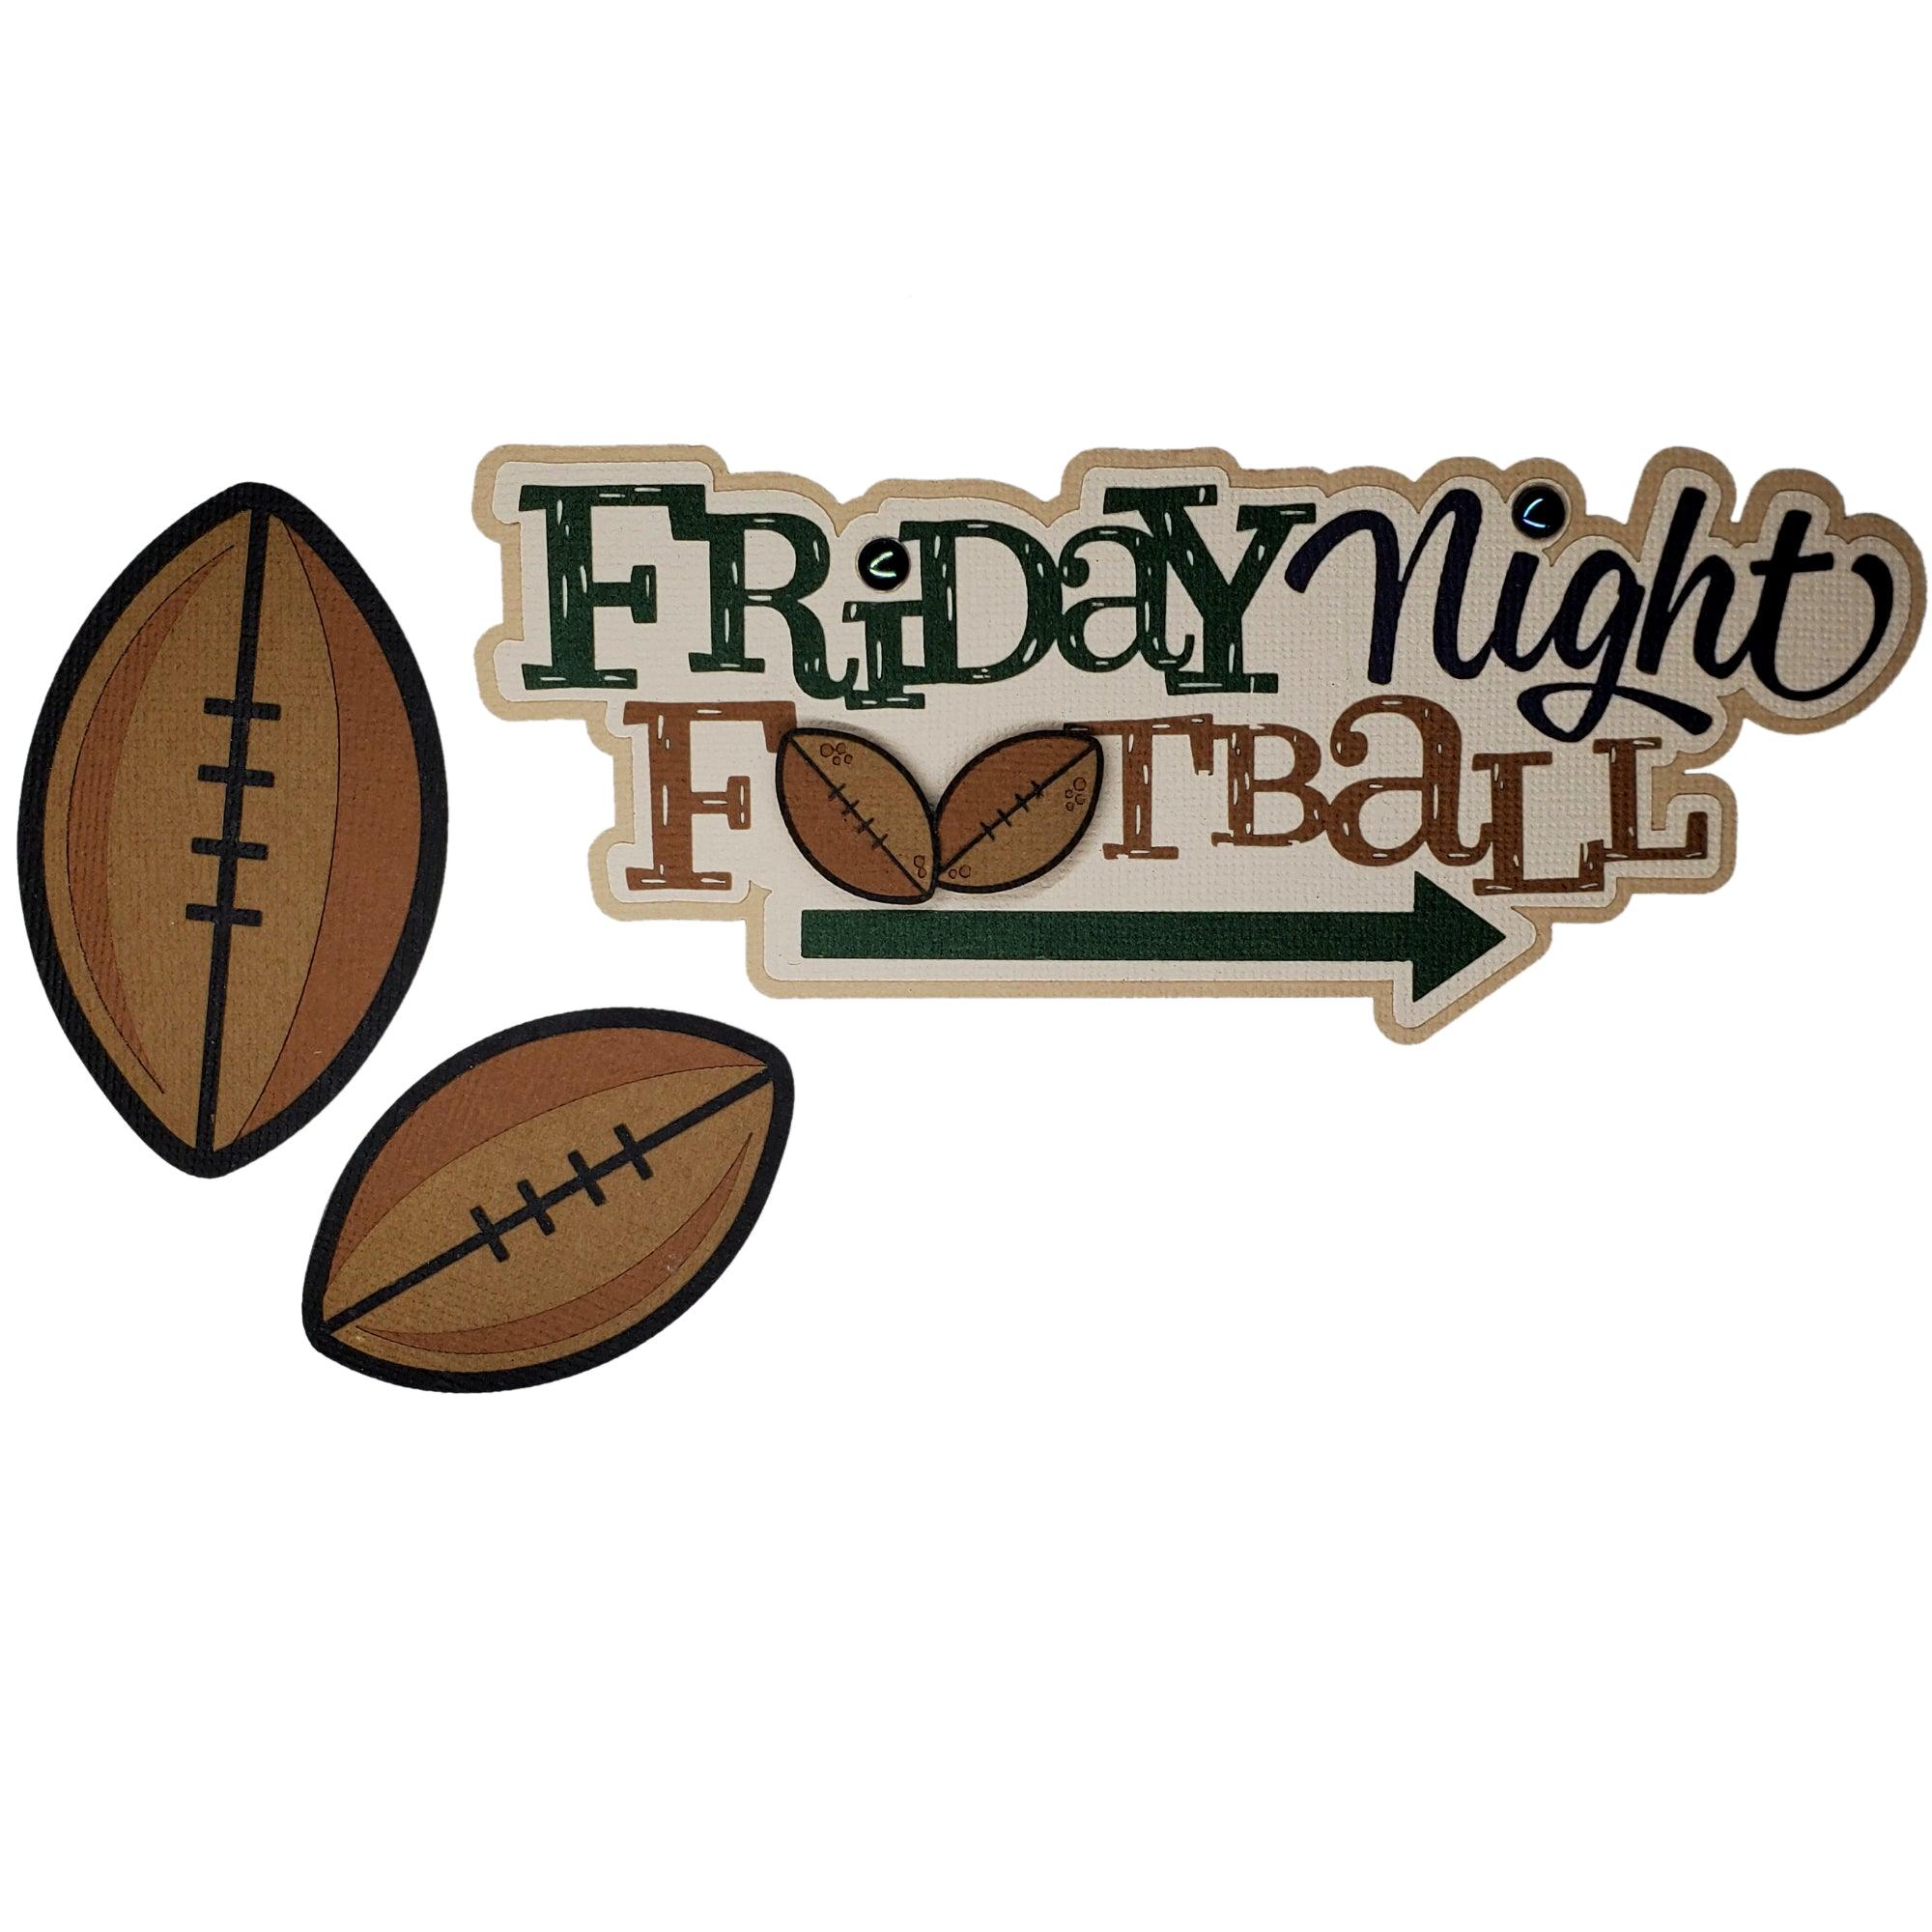 Friday Night Football Title 3 x 7 Laser Cut with Coordinating Football Scrapbook Embellishments by SSC Laser Designs